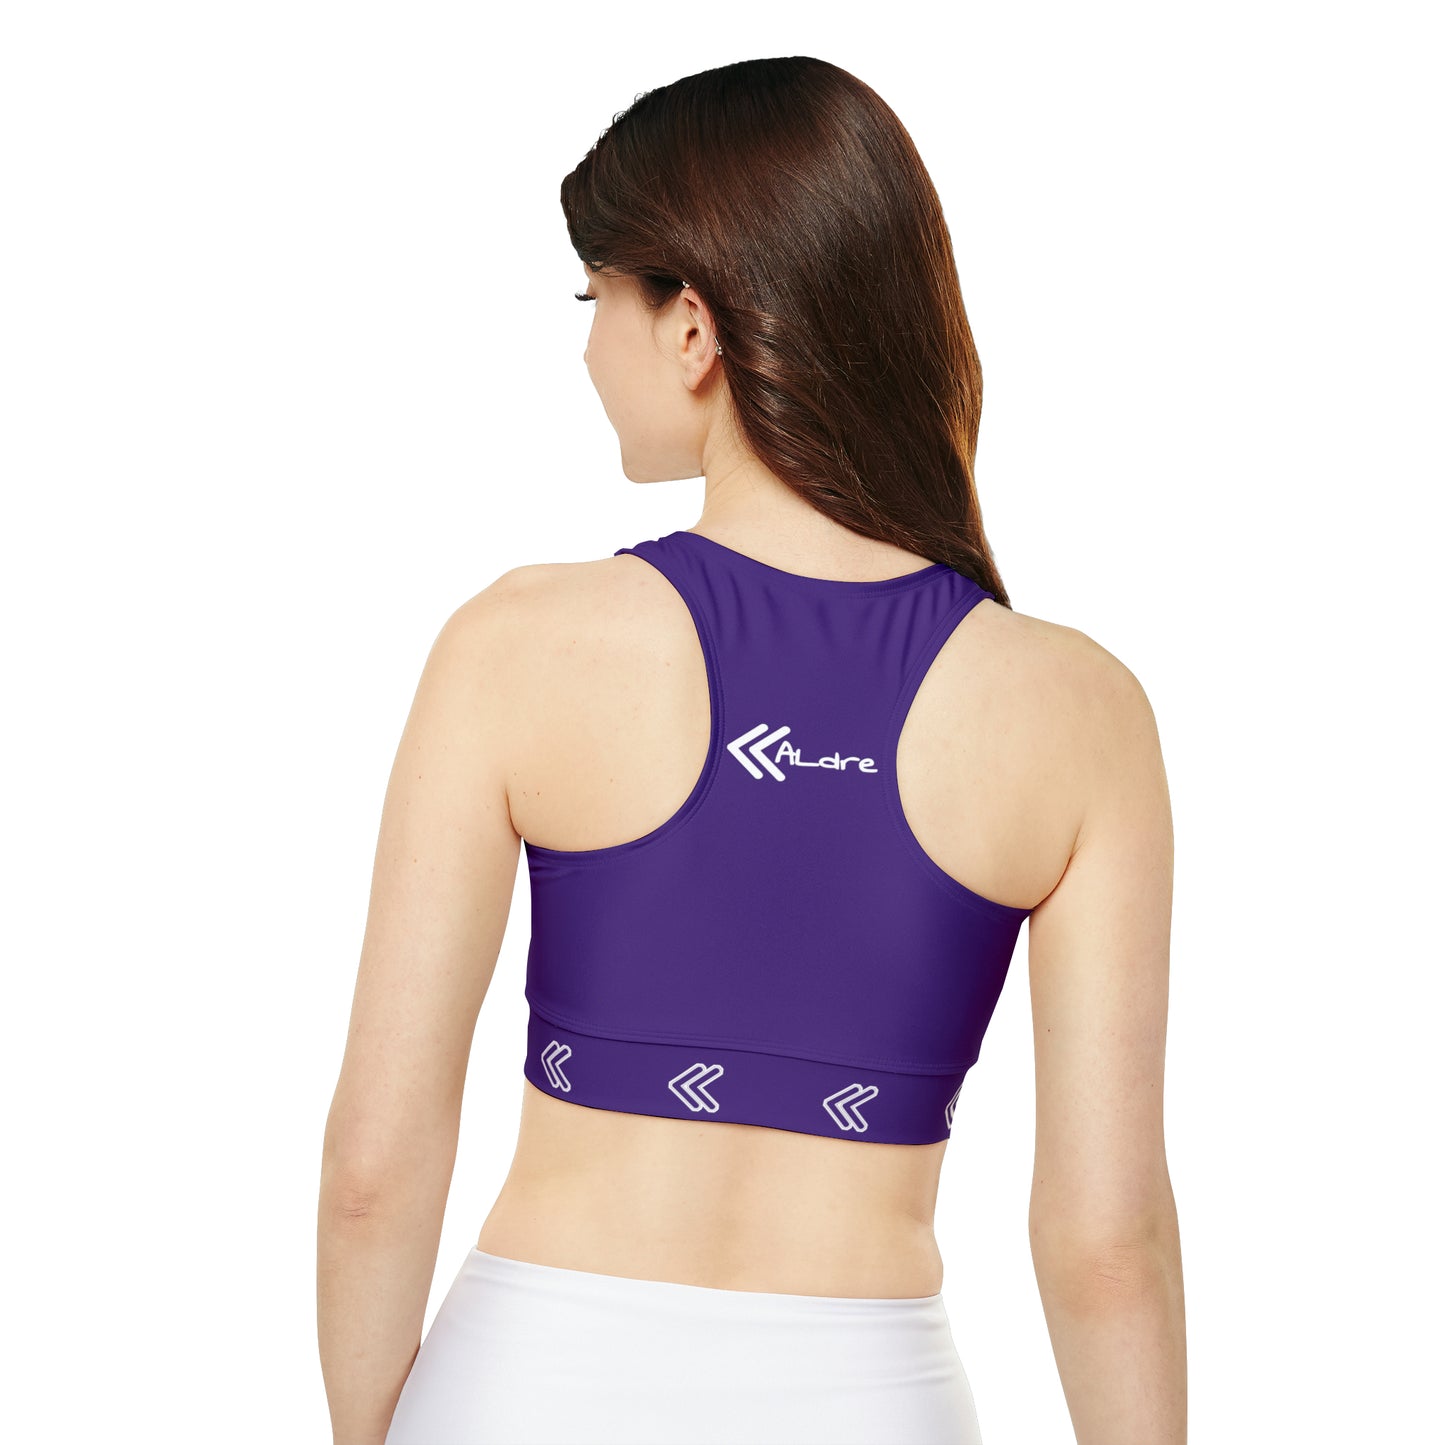 Fully Lined, Padded Sports Bra